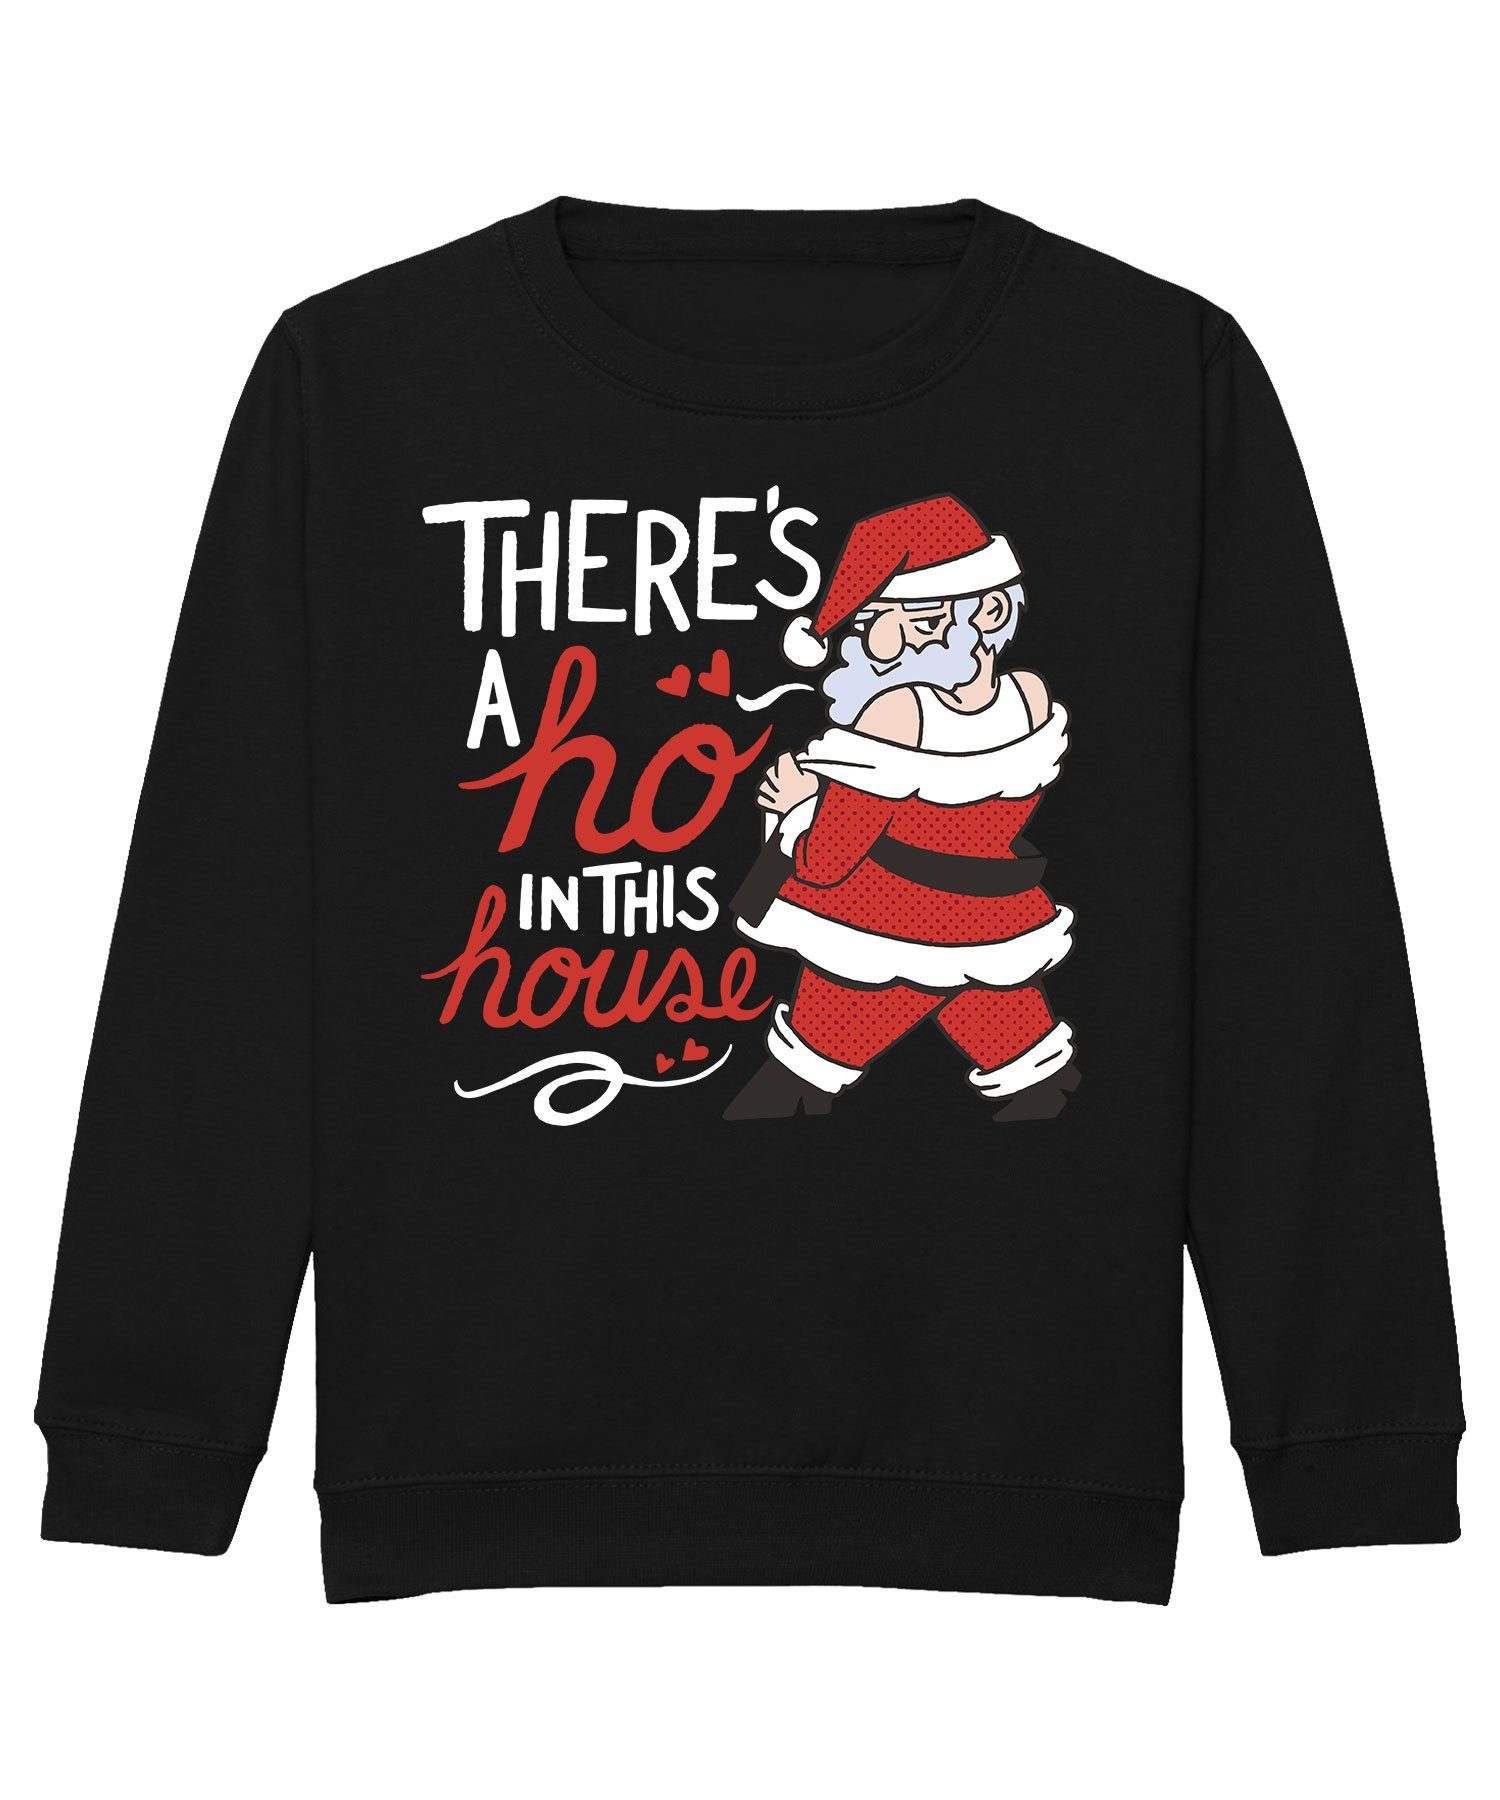 (1-tlg) a lustig Weihnachtsmann house in Ho Kinder Sweat this Pullover There's Sweatshirt Formatee Quattro